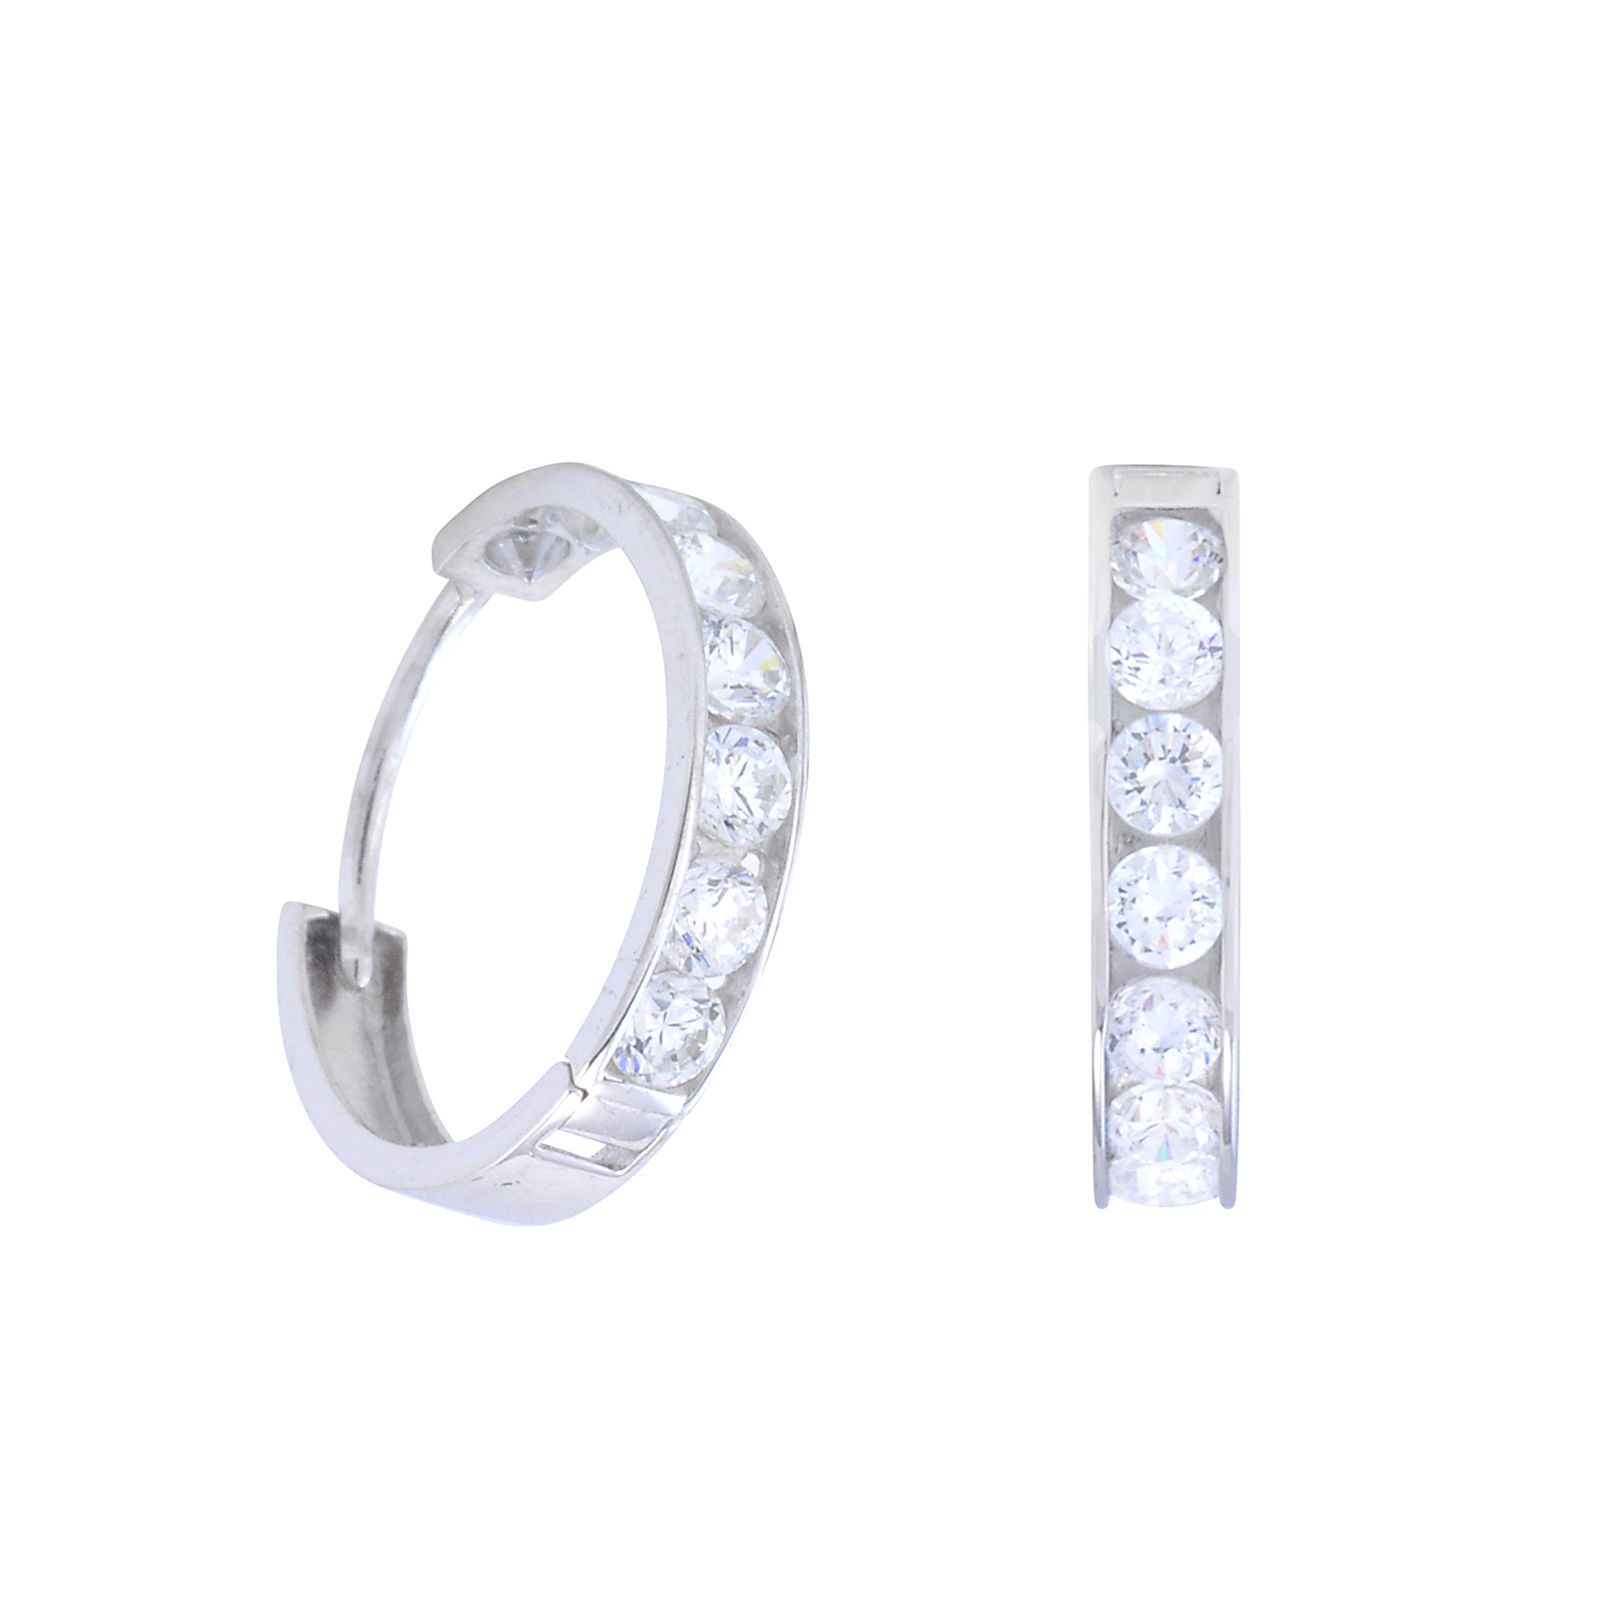 Primary image for 10k White Gold Huggie Hoop Earrings Clear CZ Cubic Zirconia 16mm x 3mm